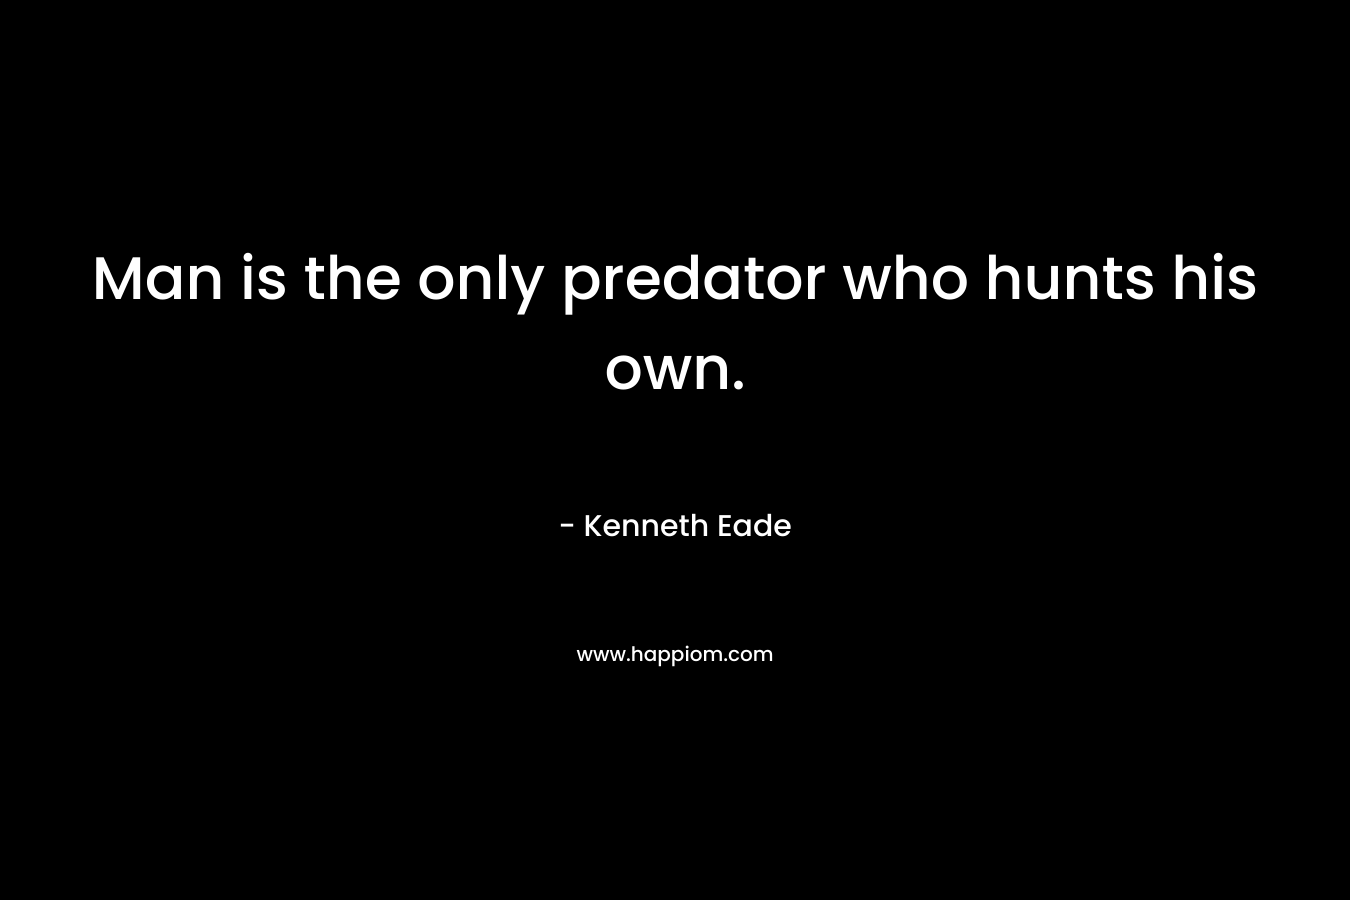 Man is the only predator who hunts his own. – Kenneth Eade